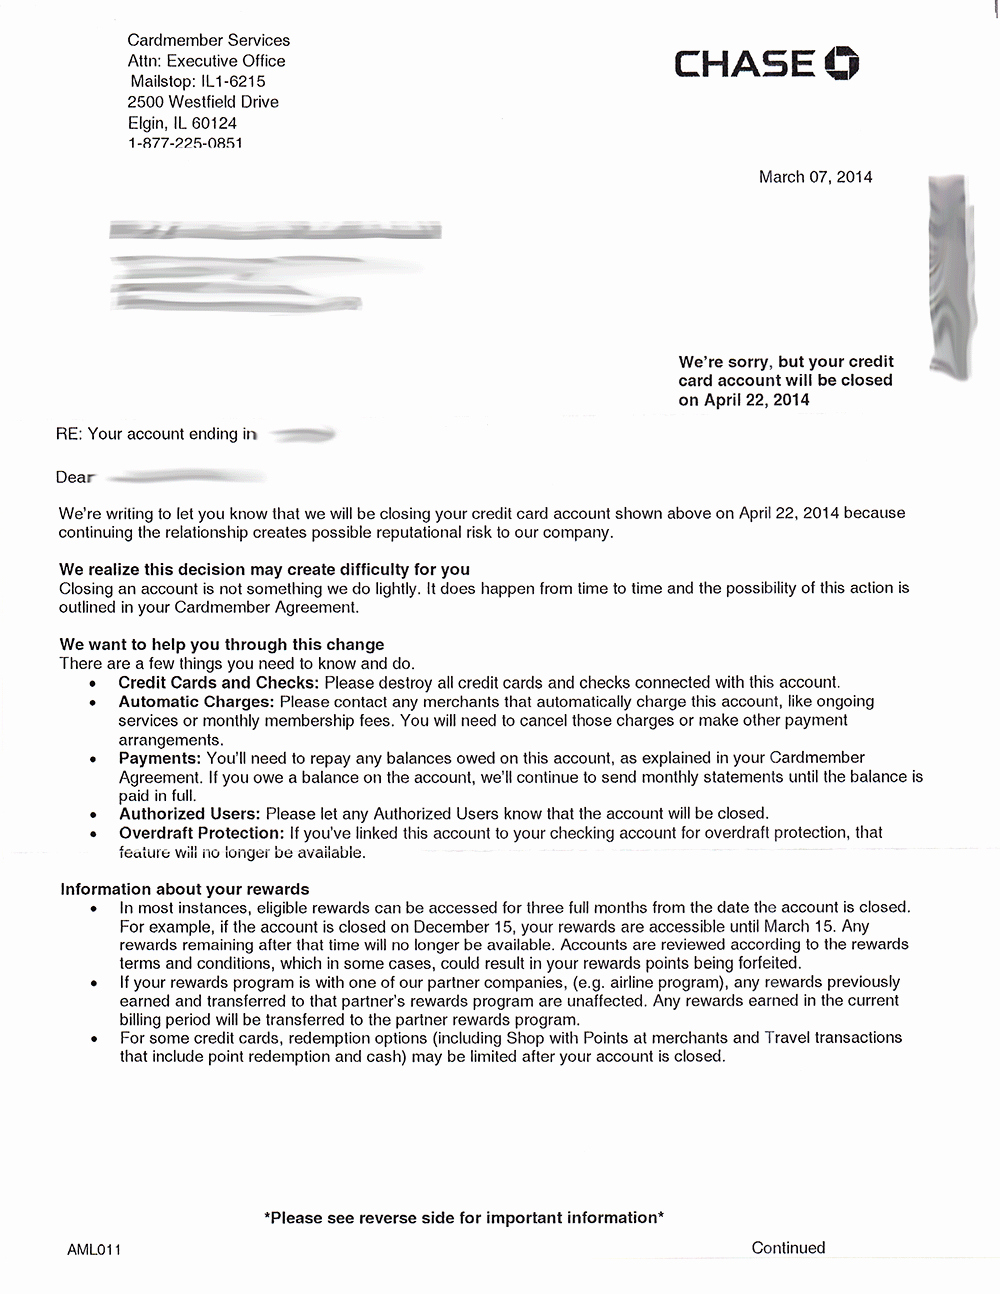 Chase Bank Proof Of Funds Letter Luxury I Believe Chase Bank Closed My Accounts for Ing Bitcoin